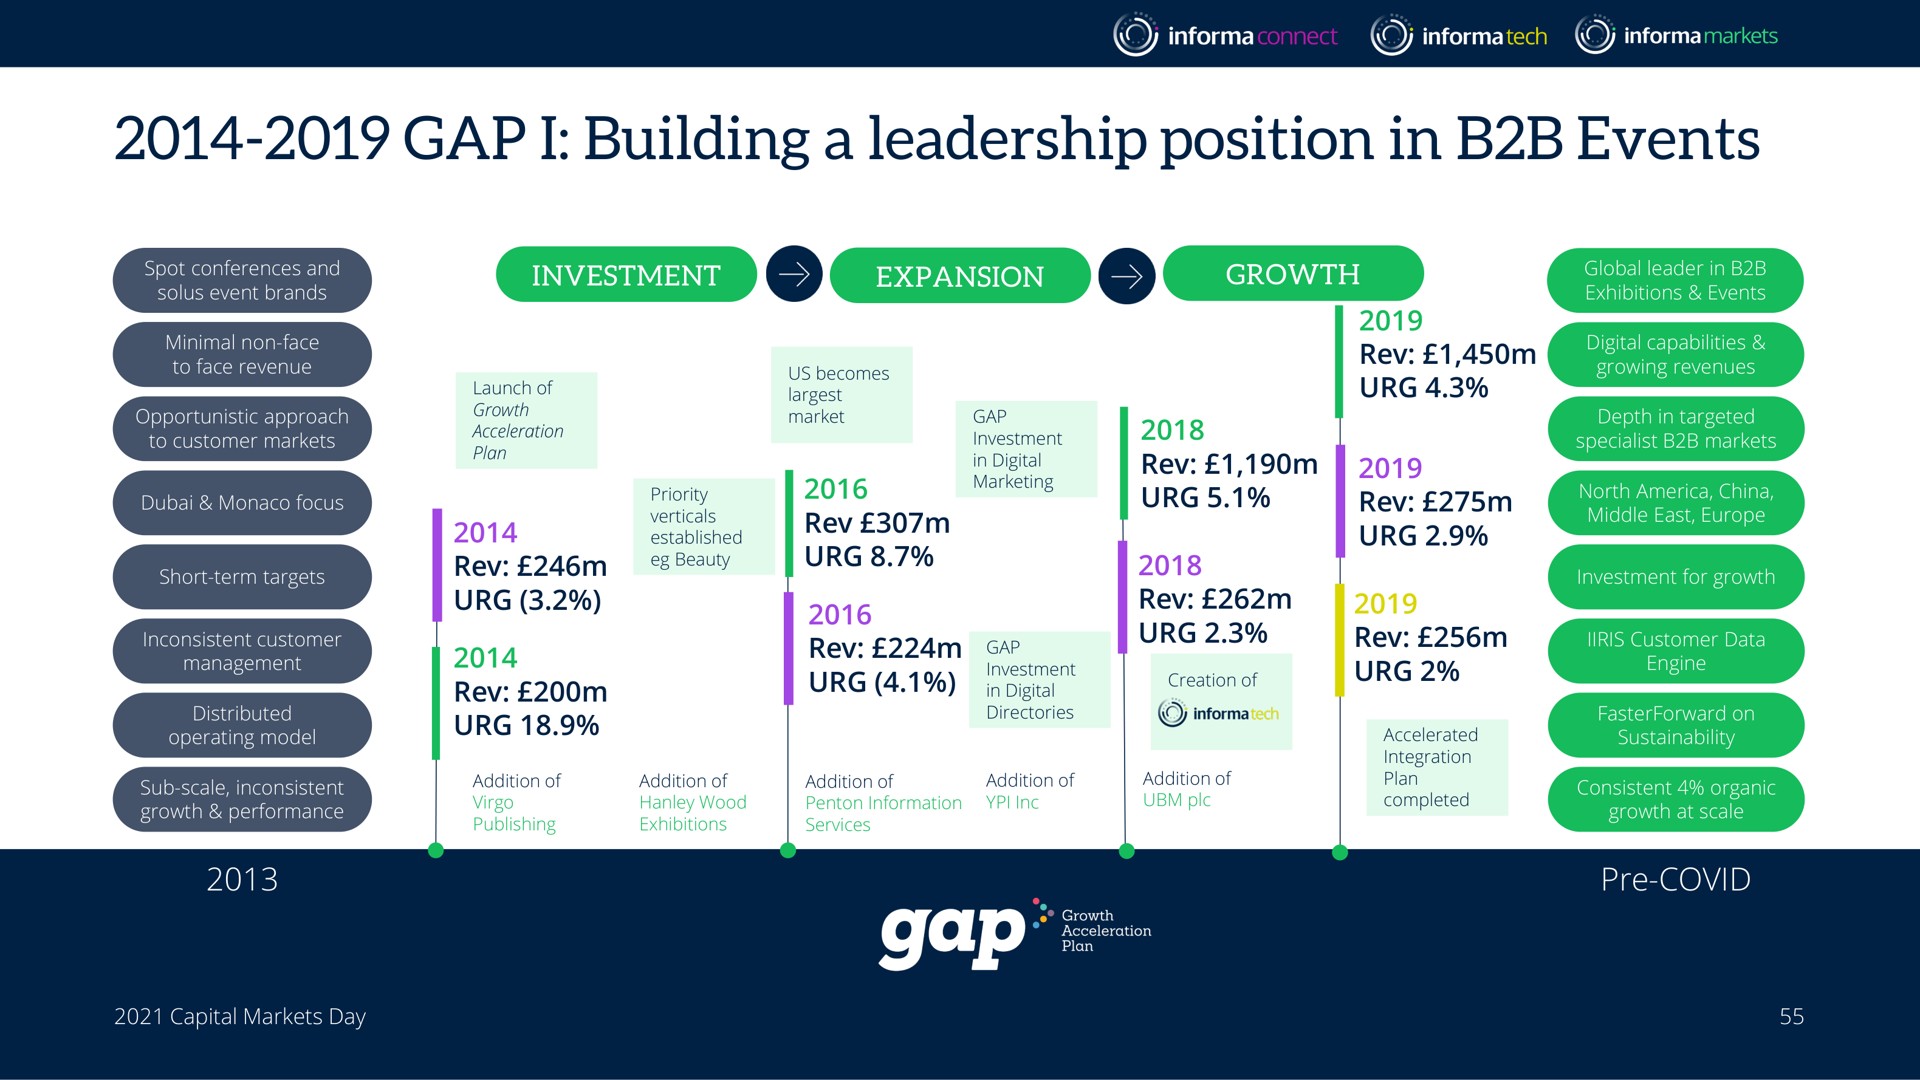 gap i building a leadership position in events | Informa